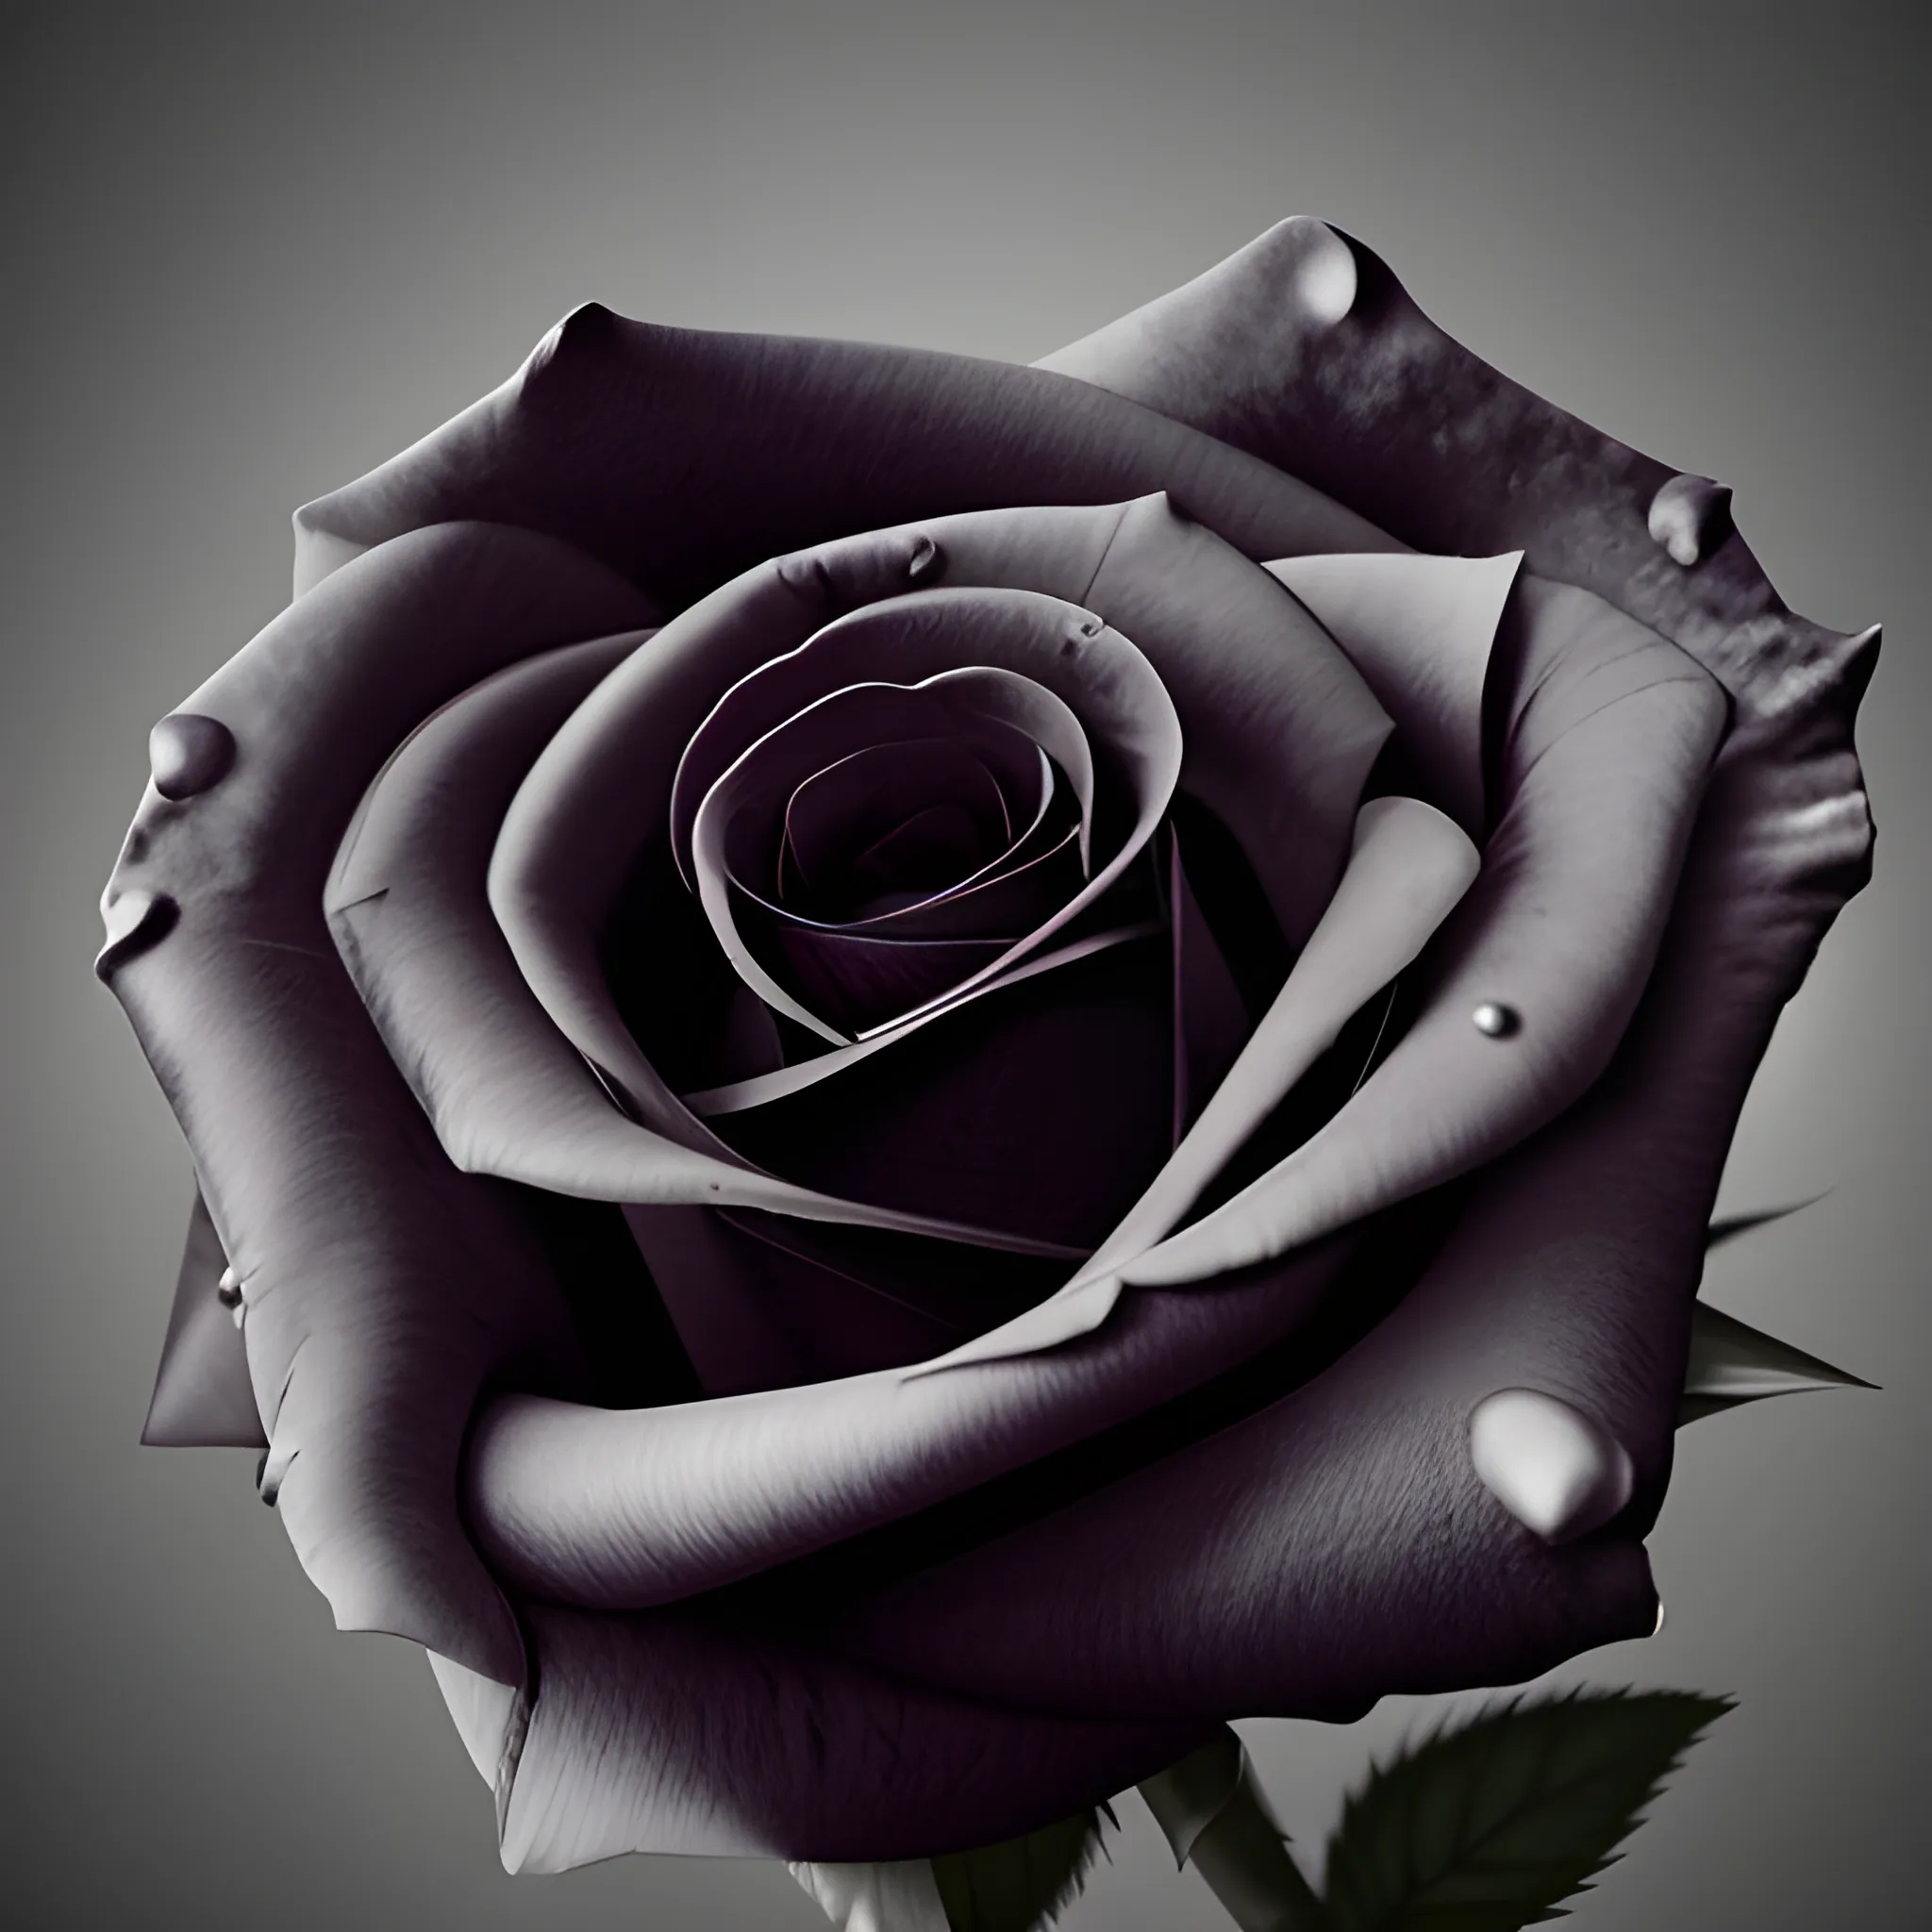 Black rose, background color is mysterious and deep